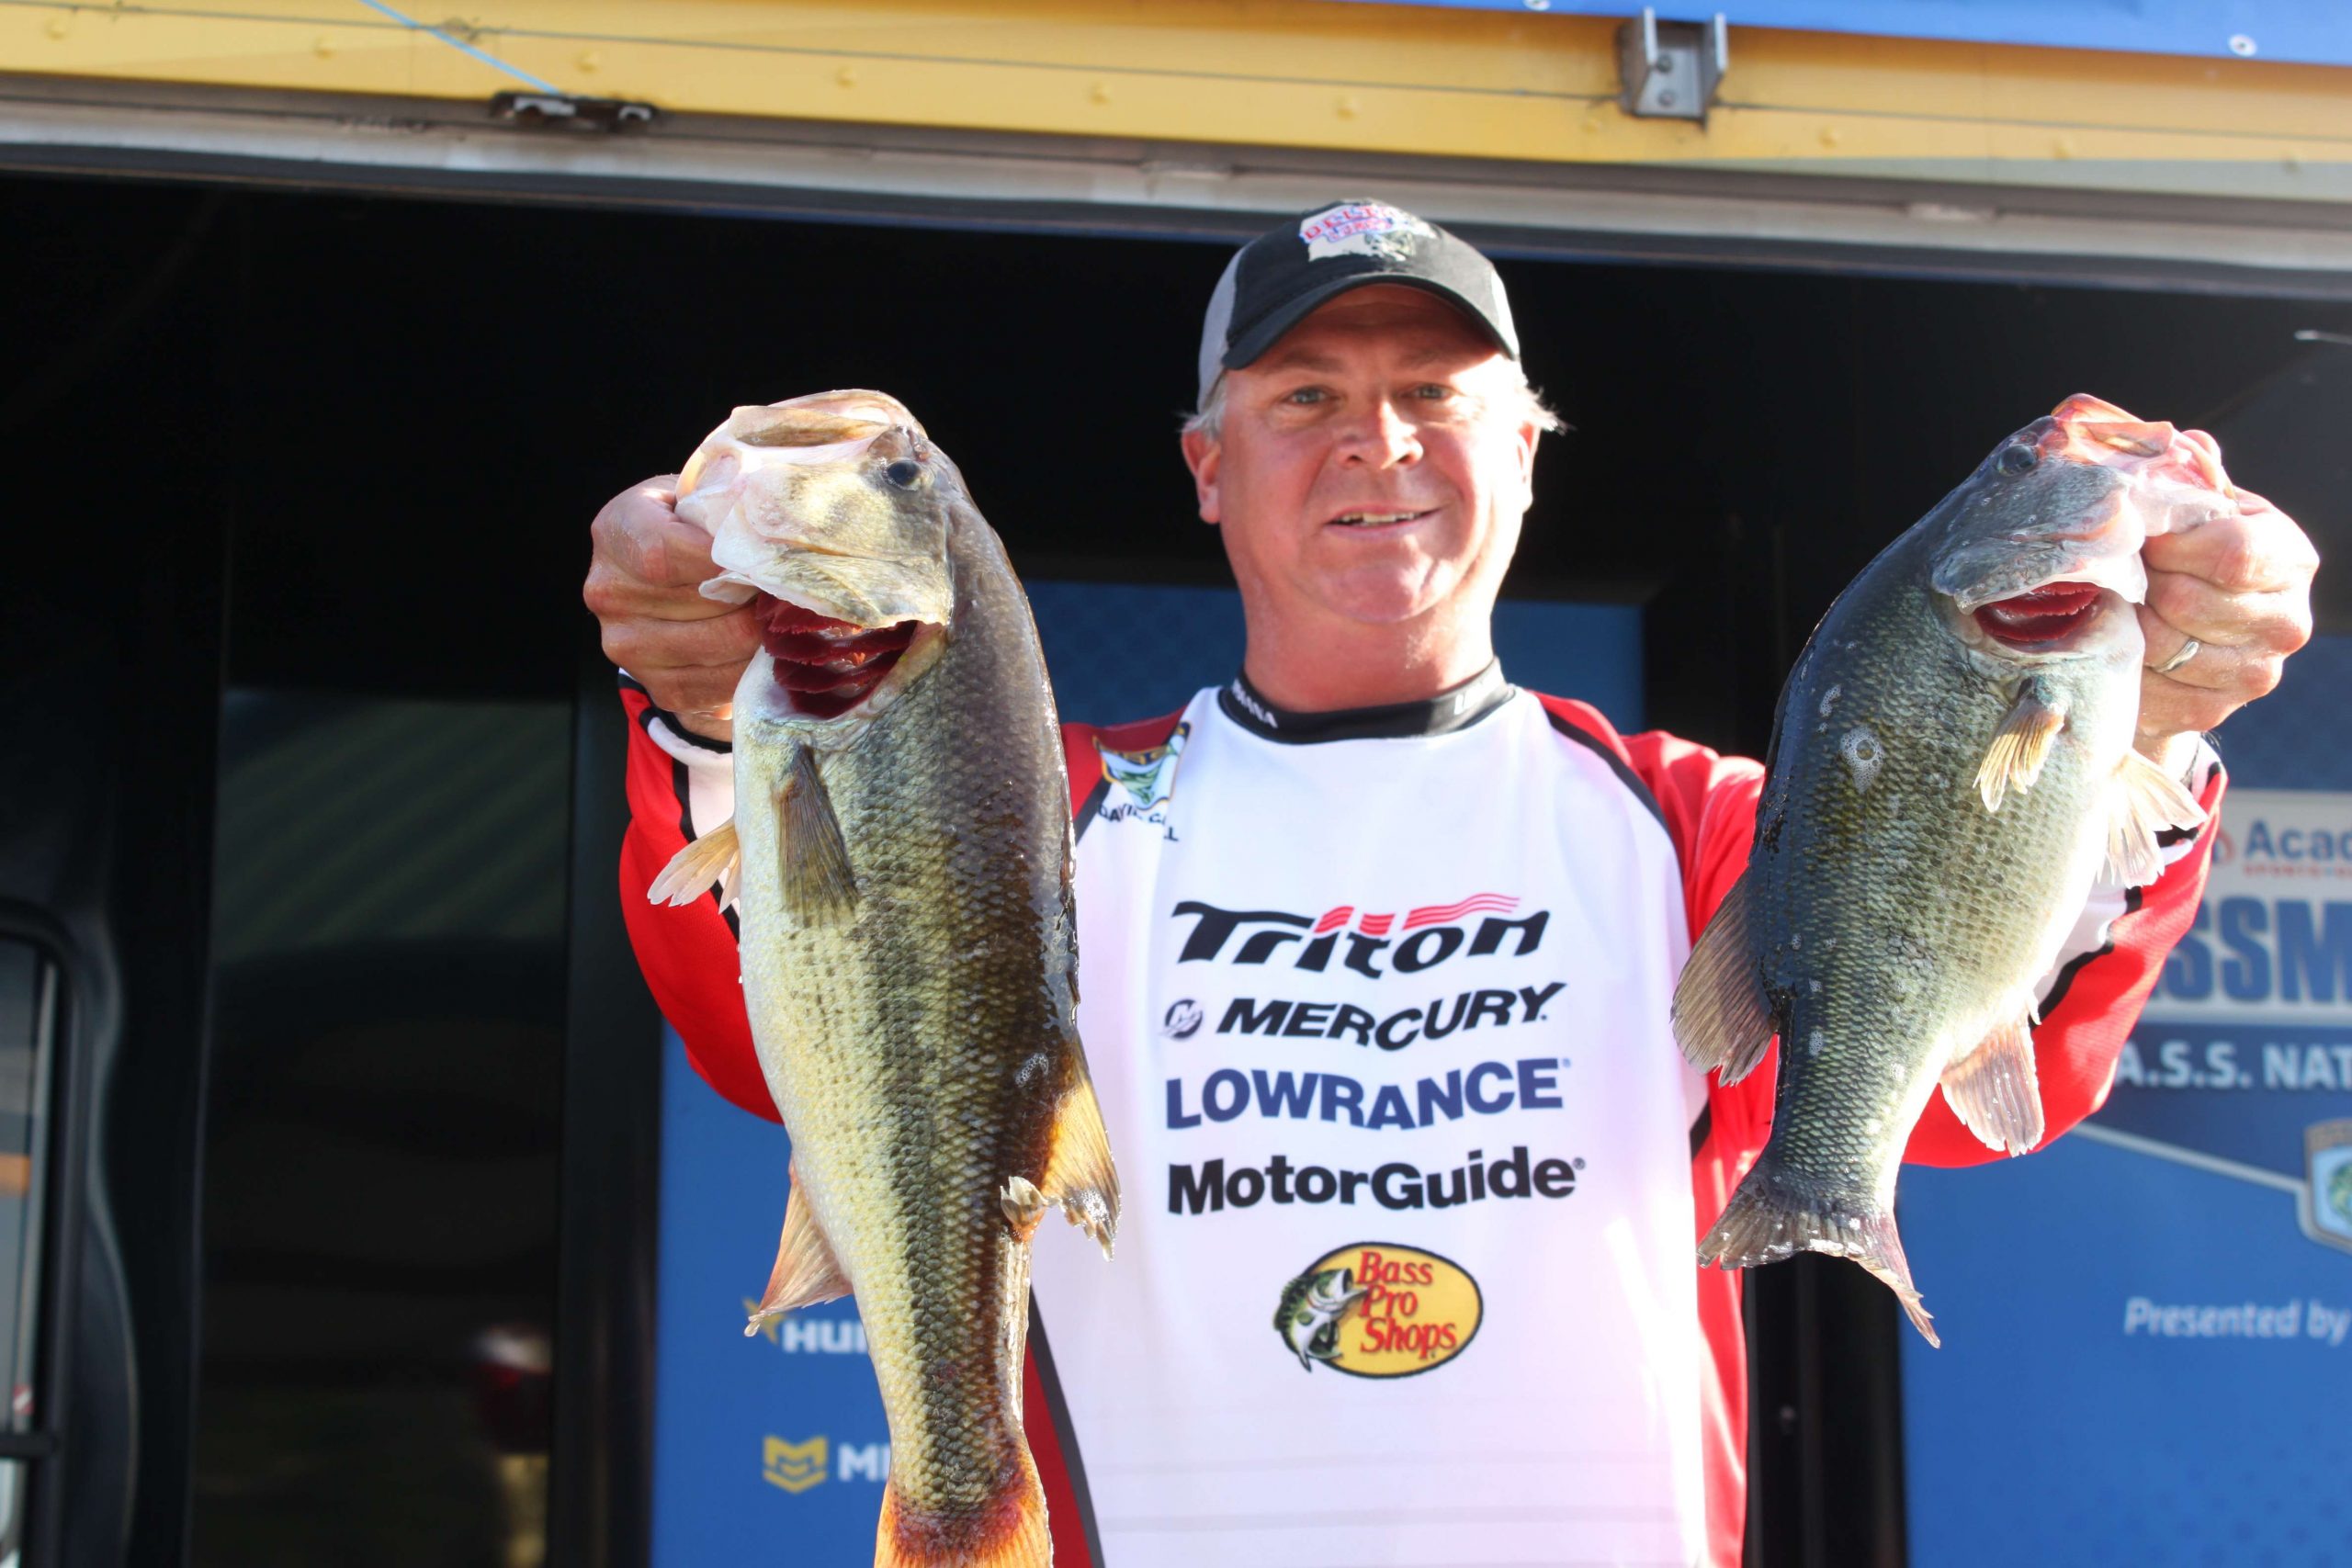 David Cavell helped Team Louisiana win the team title with fish like these. He's in 11th place among boaters with 31-10.